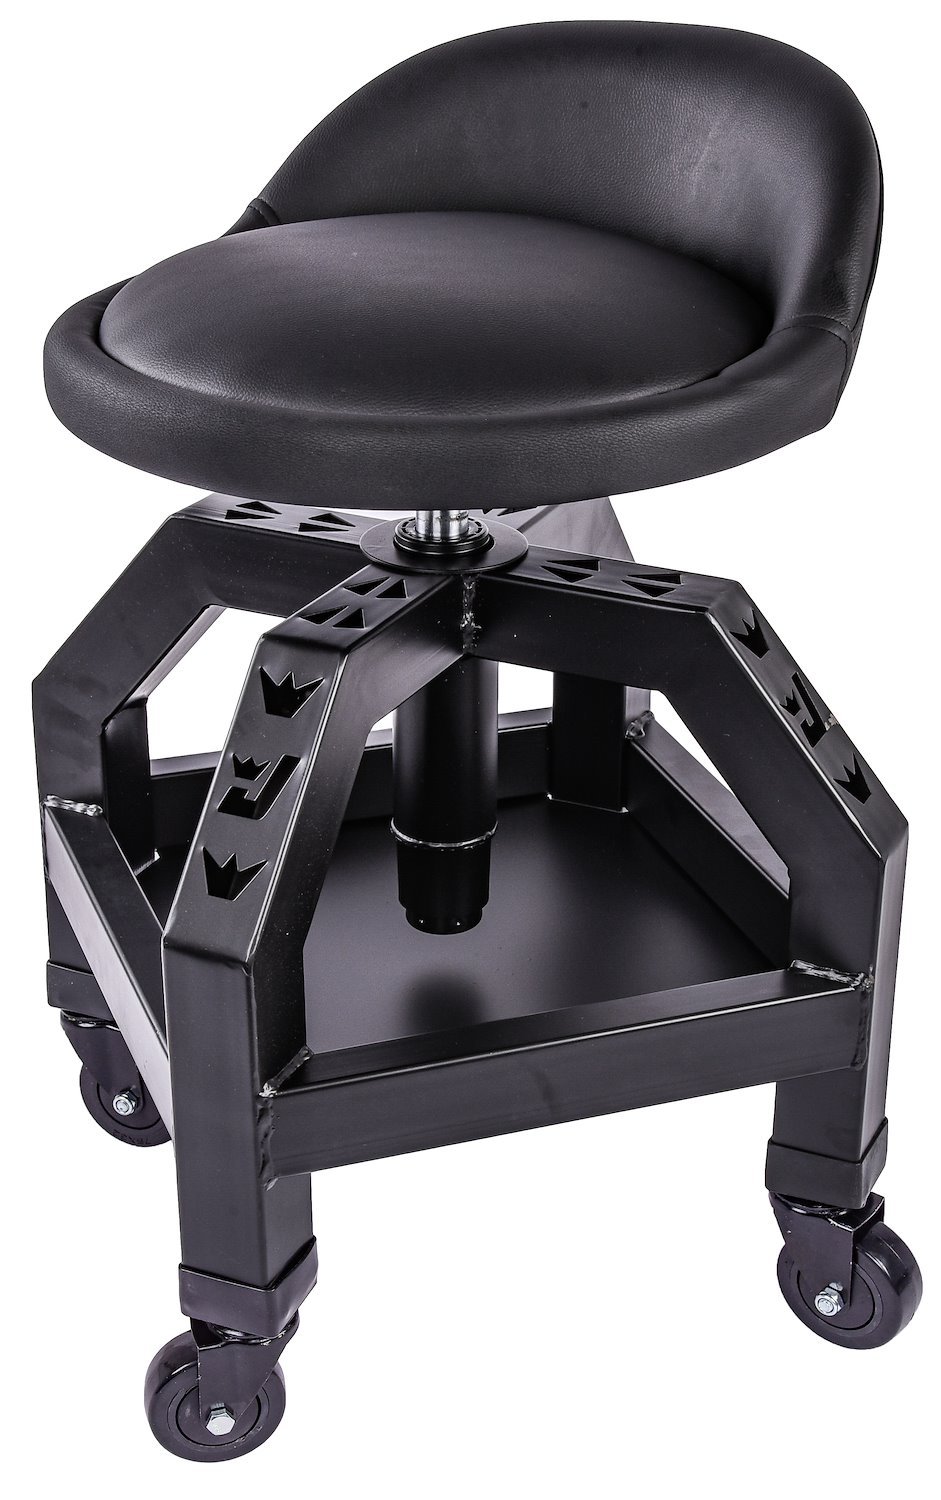 Shop Stool with Wheels - Heavy Duty Garage Work Chair with Wheels - JEGS  High Performance - JEGS